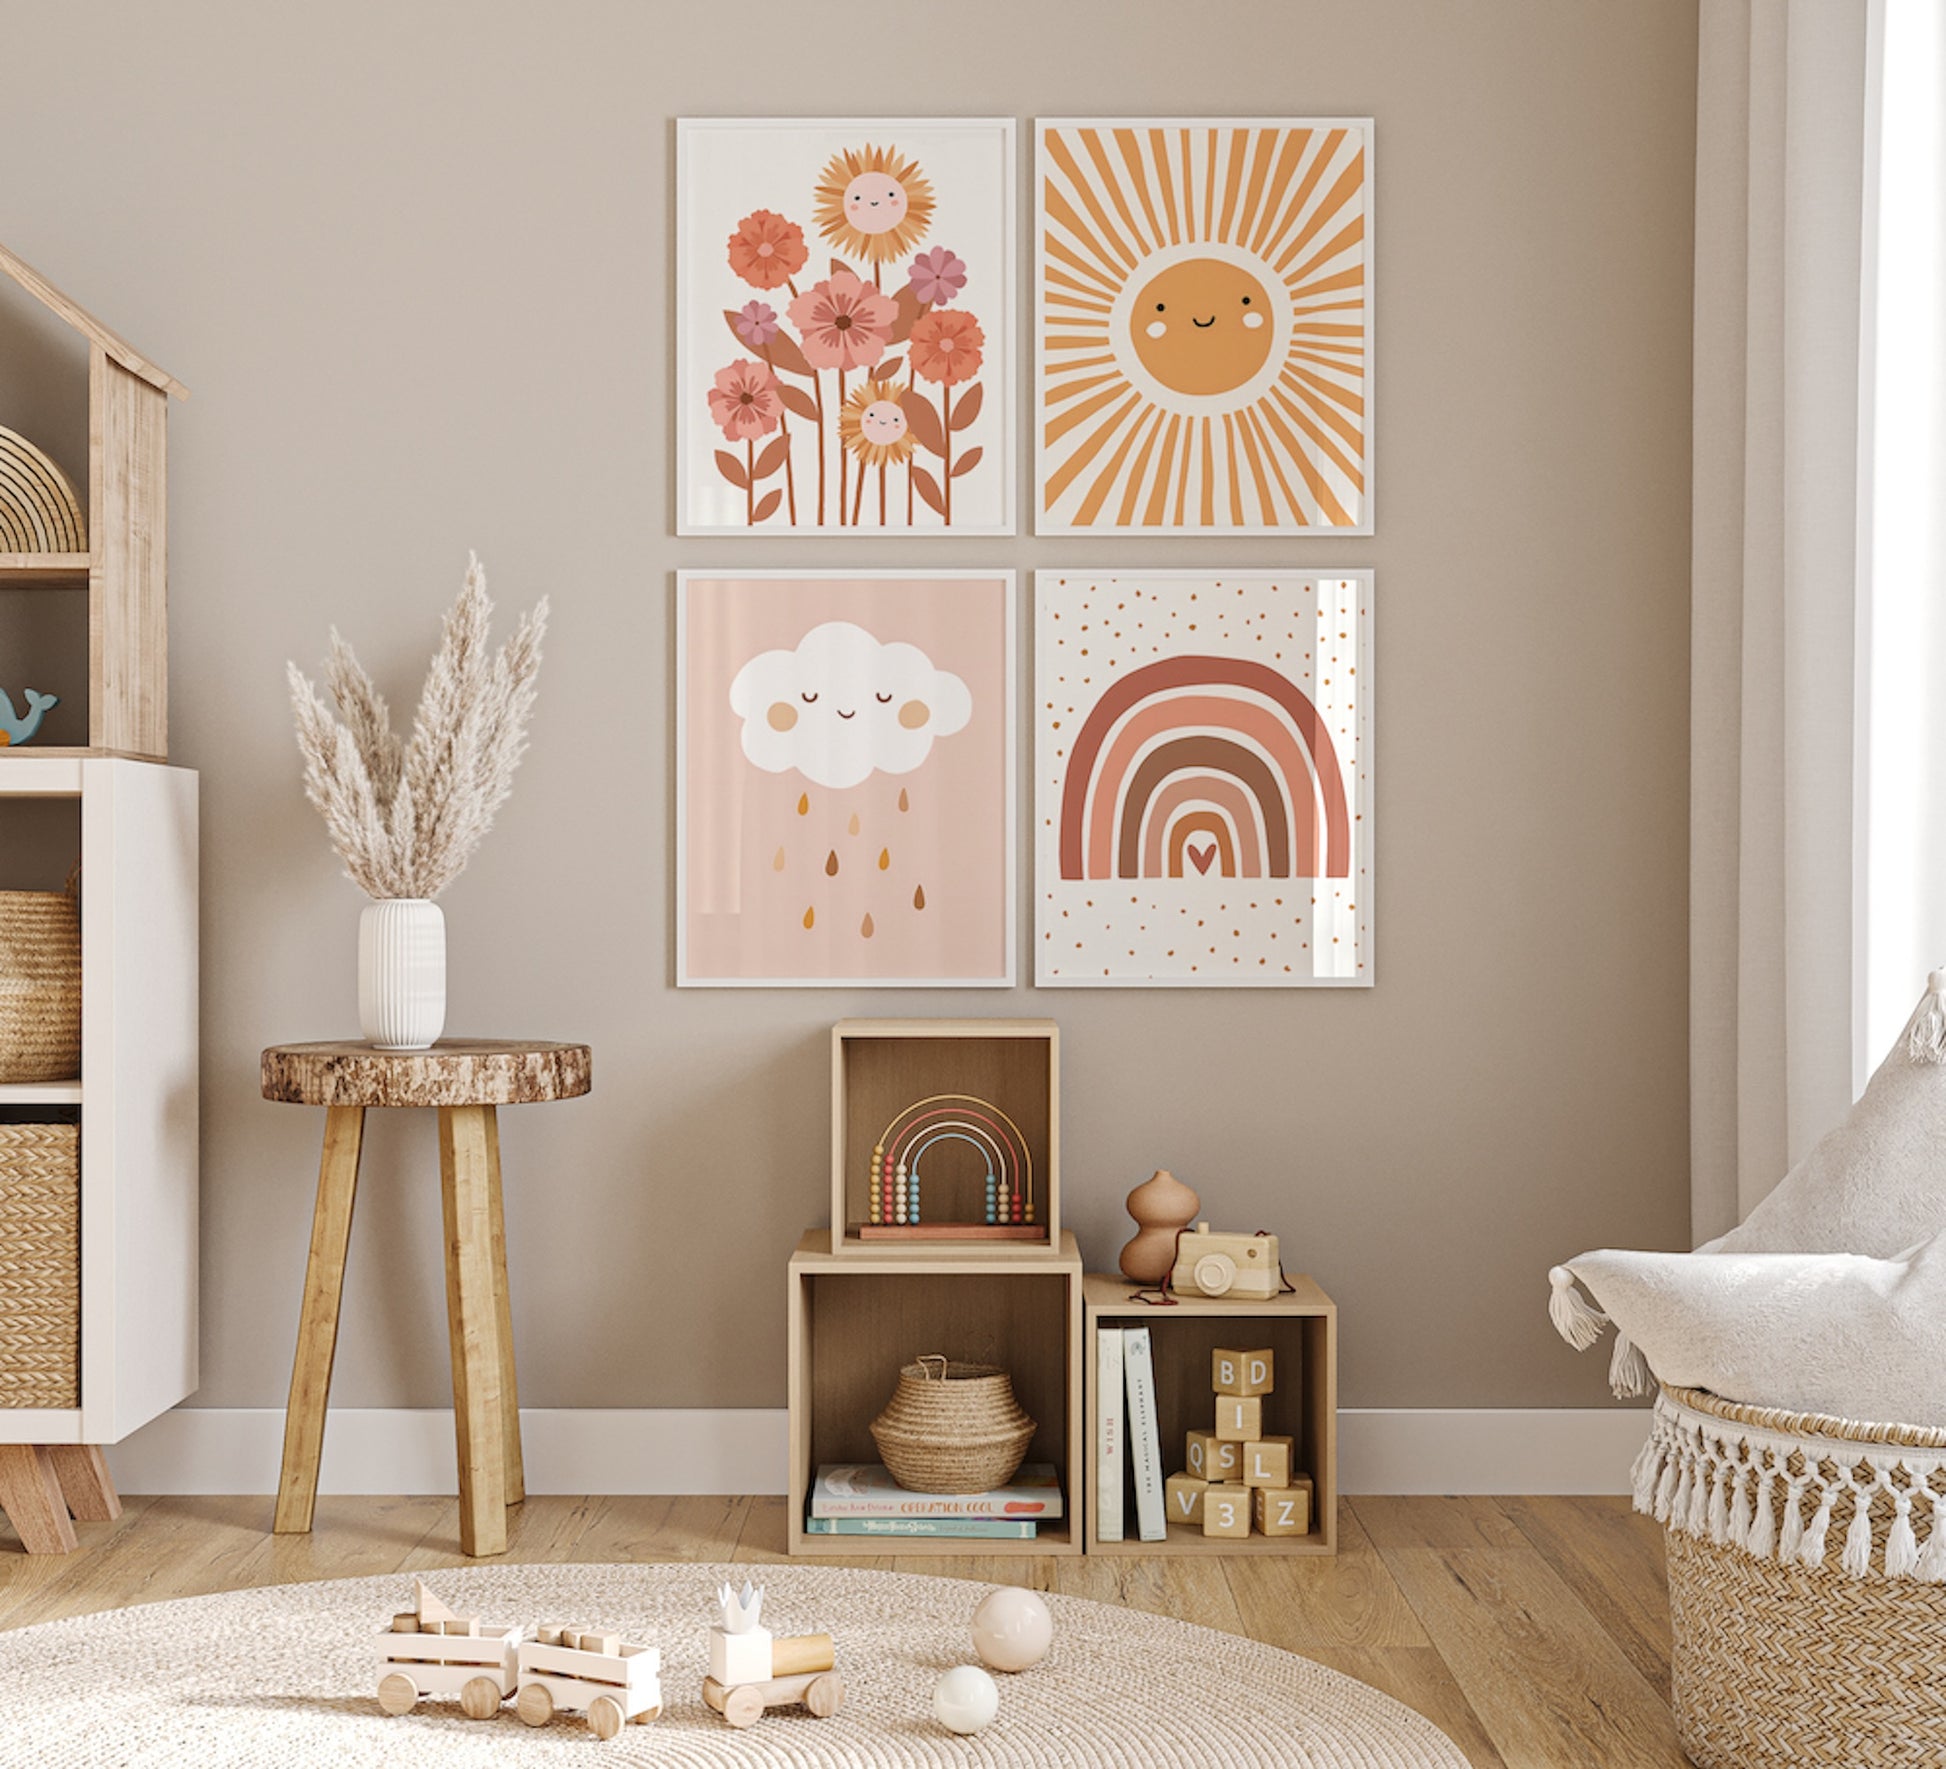 Poster children's room pictures sunbeams flowers rainbow and rain clou –  justgoodmood